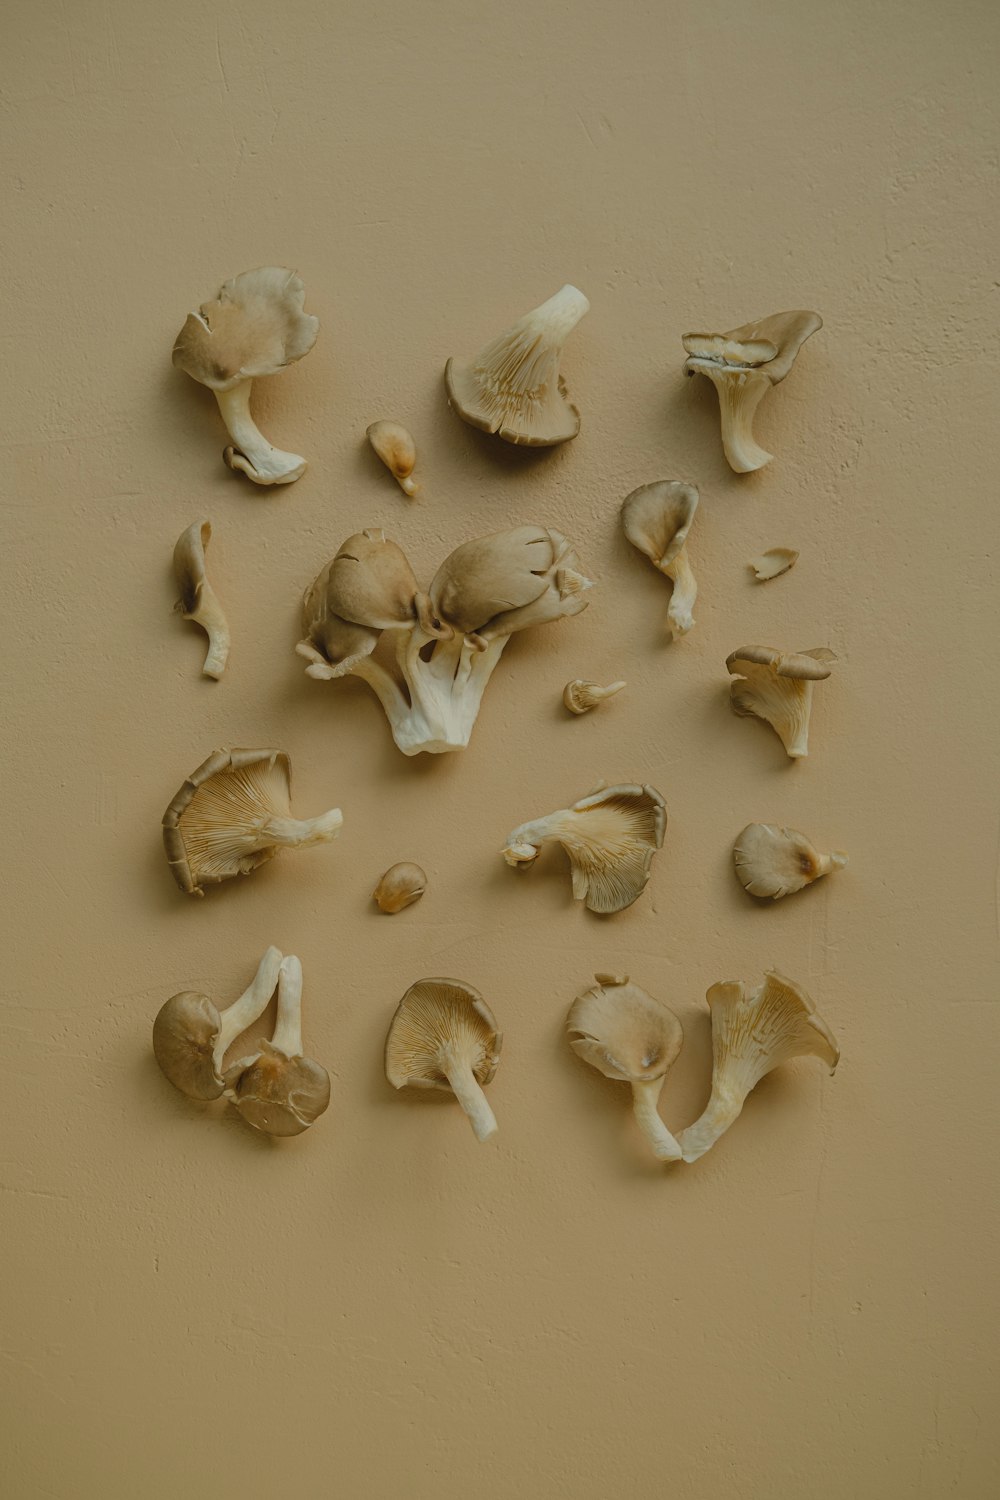 a group of mushrooms on a brown surface